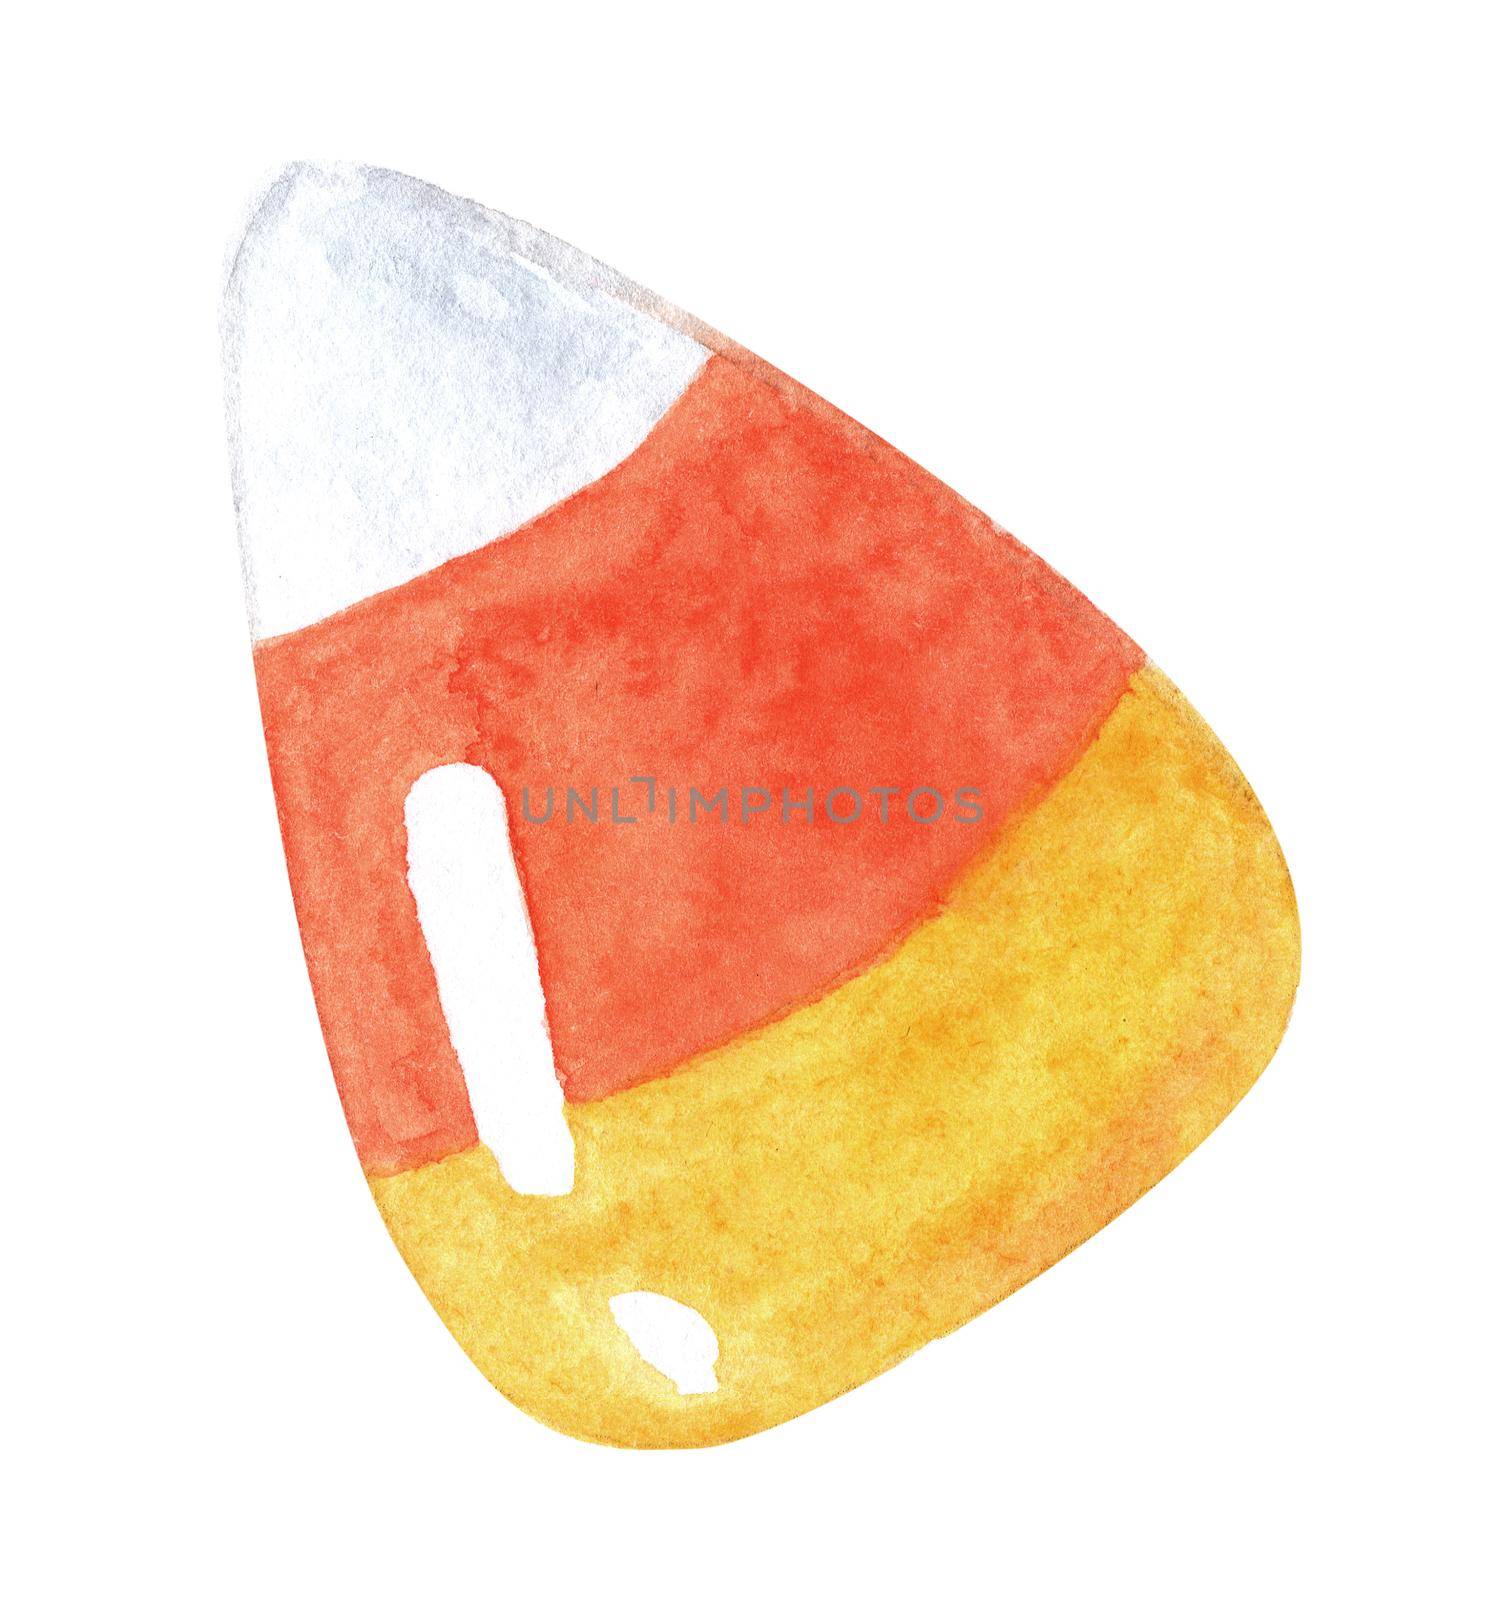 Watercolor candy corn halloween dessert isolated on white background